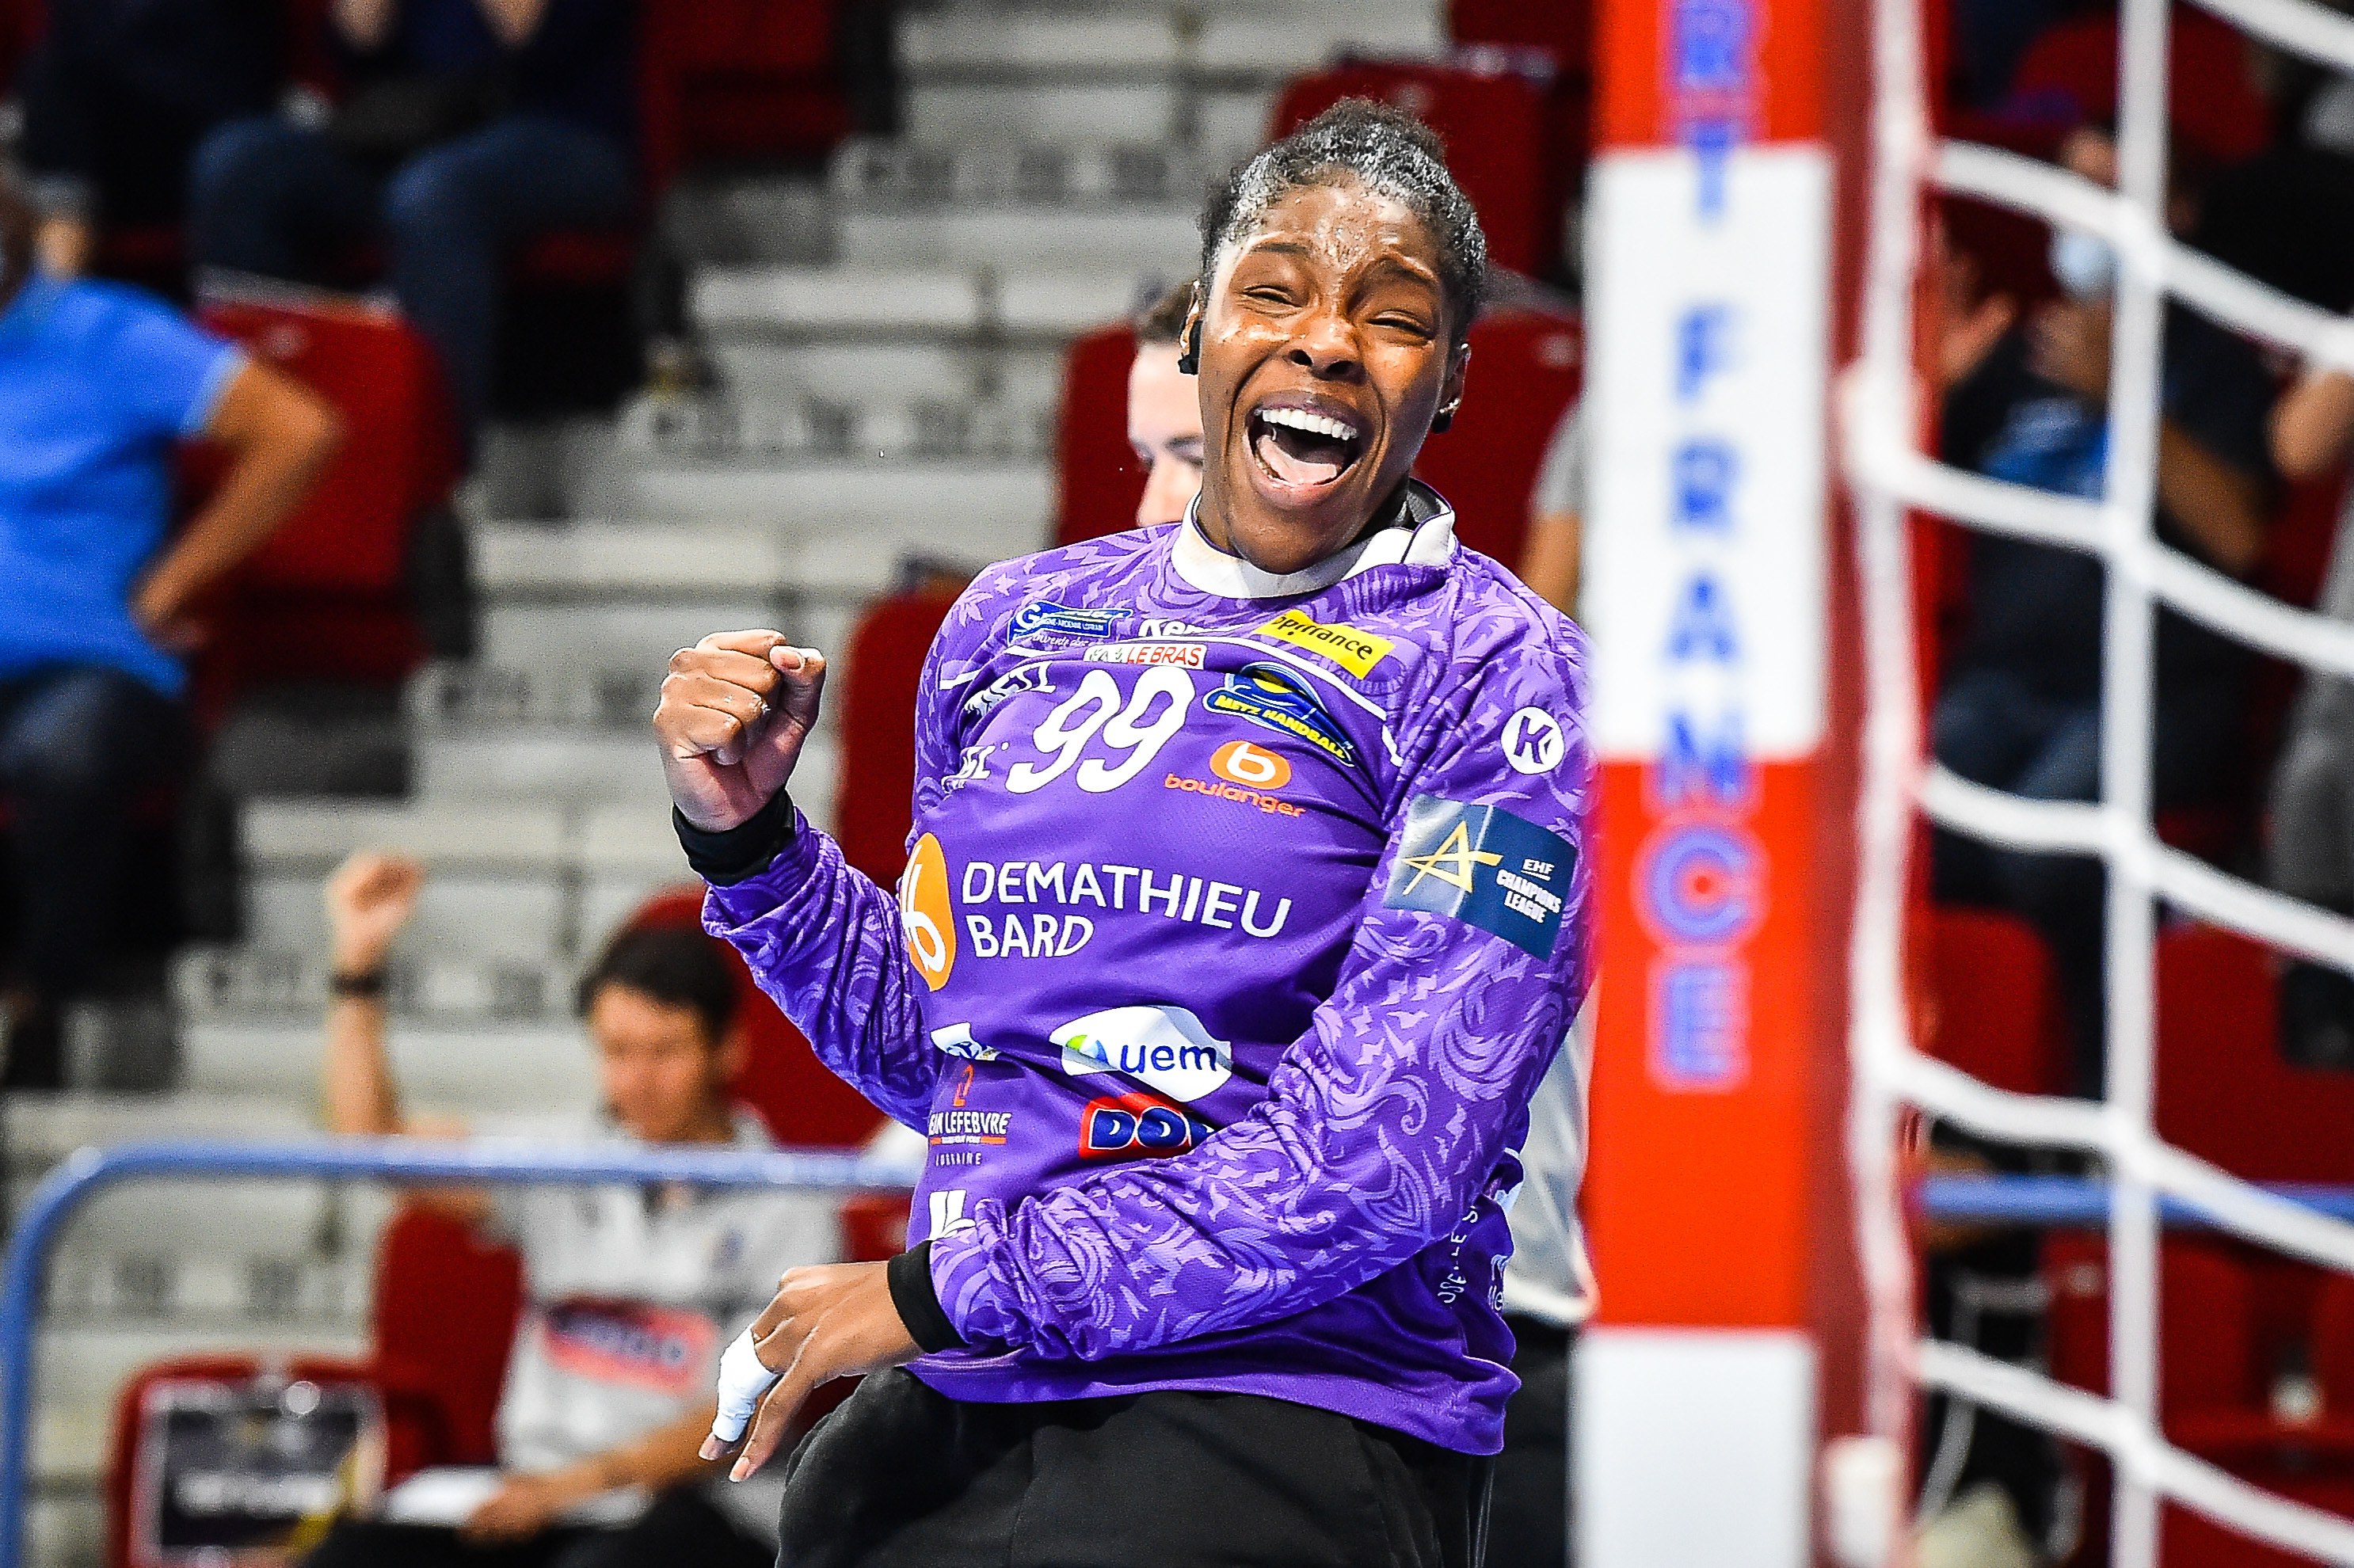 Hatadou SAKO of Metz during the DELO EHF Champions League match between Metz and Kristiansand on September 26, 2021 in Metz, France. (Photo by Matthieu Mirville/Icon Sport) -  (France)